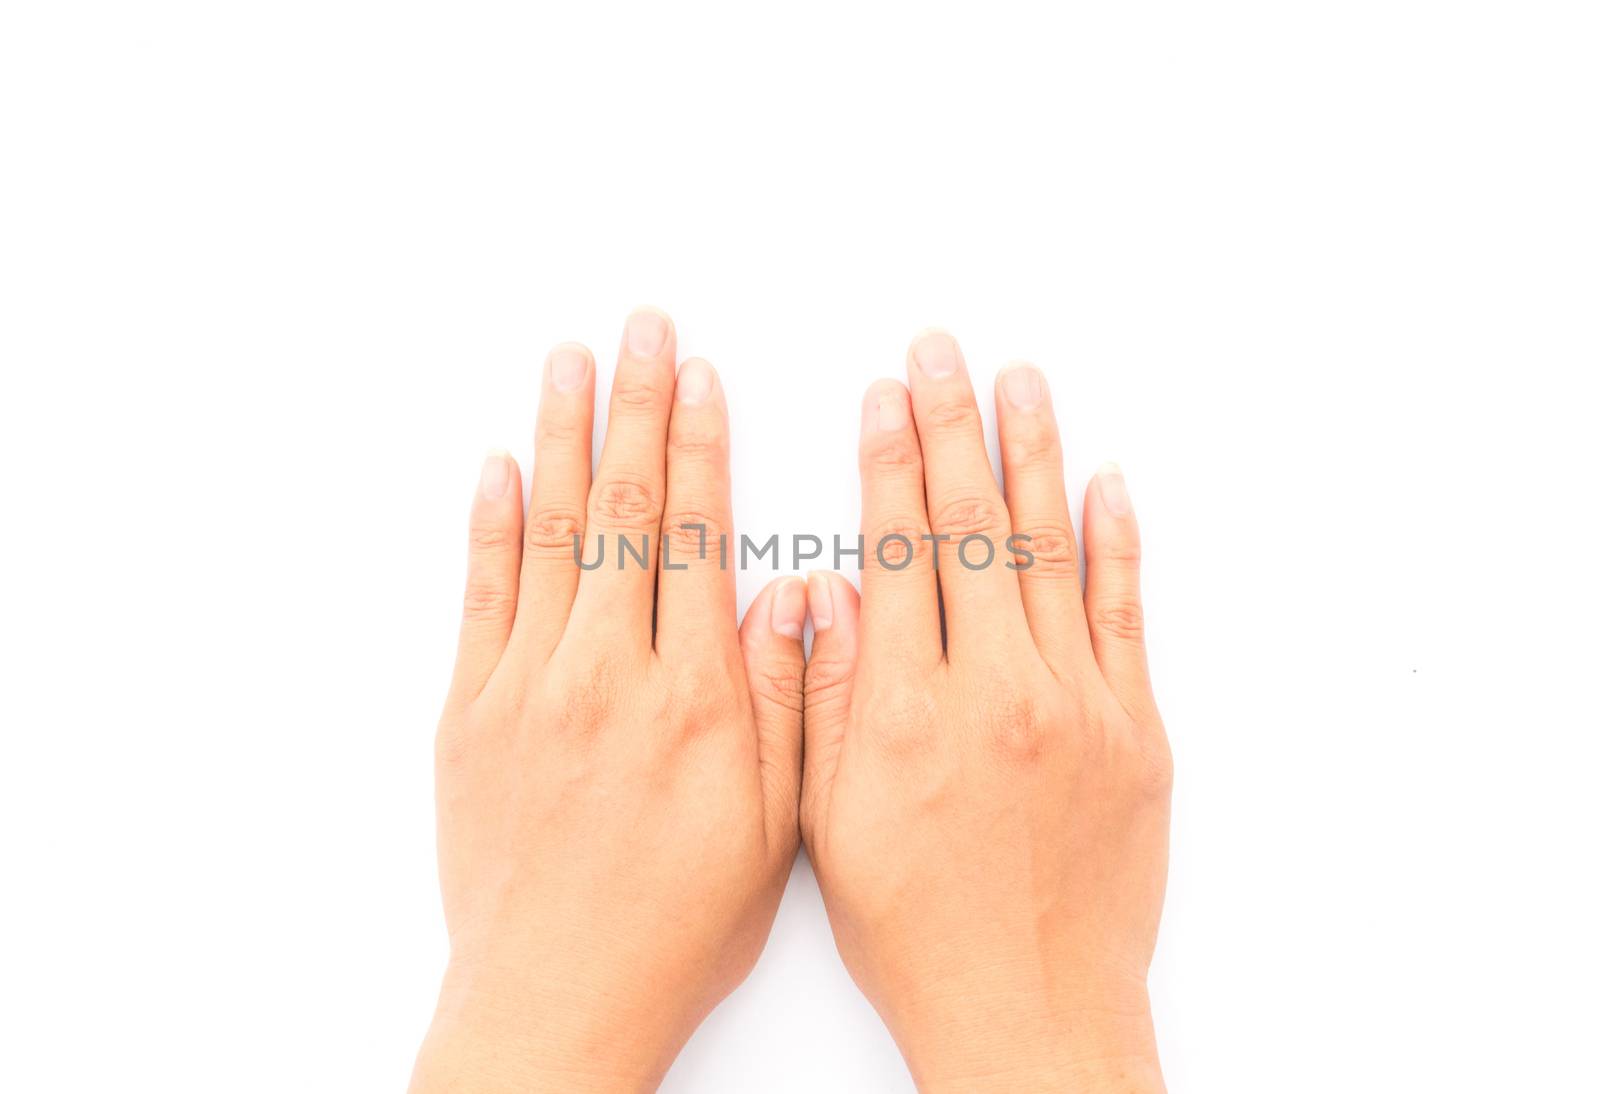 Woman hands praying on white background, religion concept